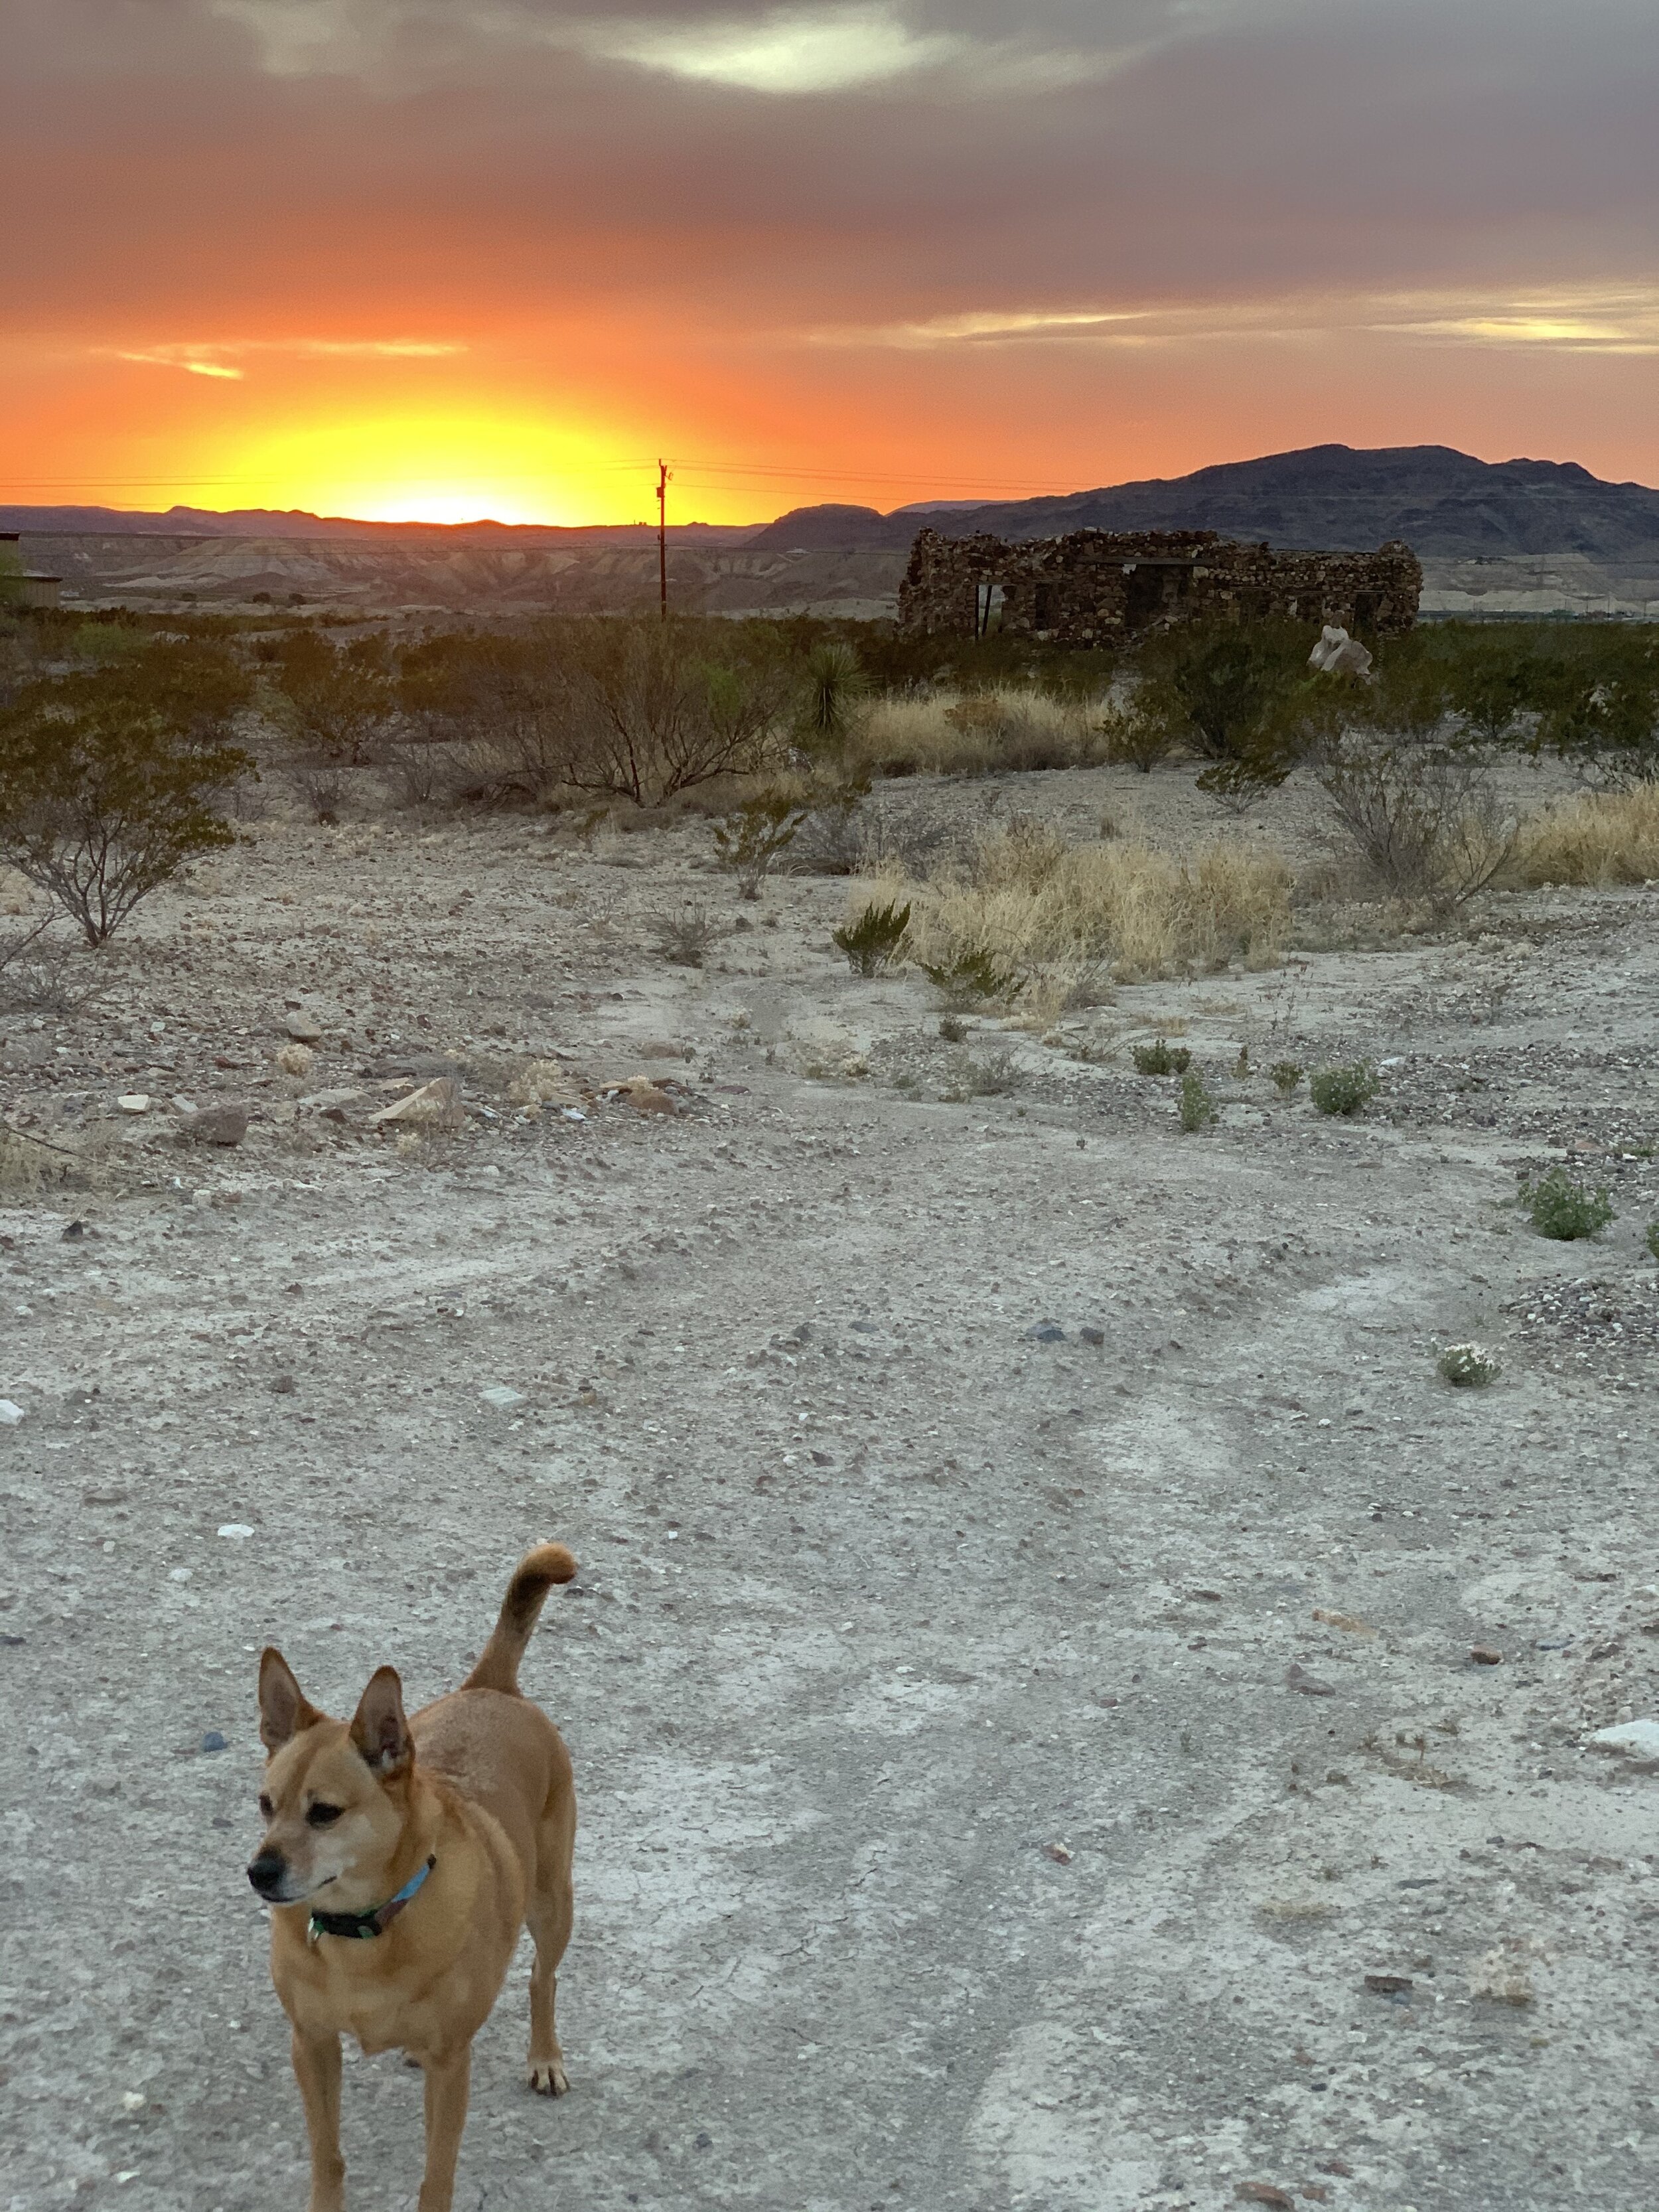  Terlingua was really a peaceful place. The sunsets every single night were so beautiful!  